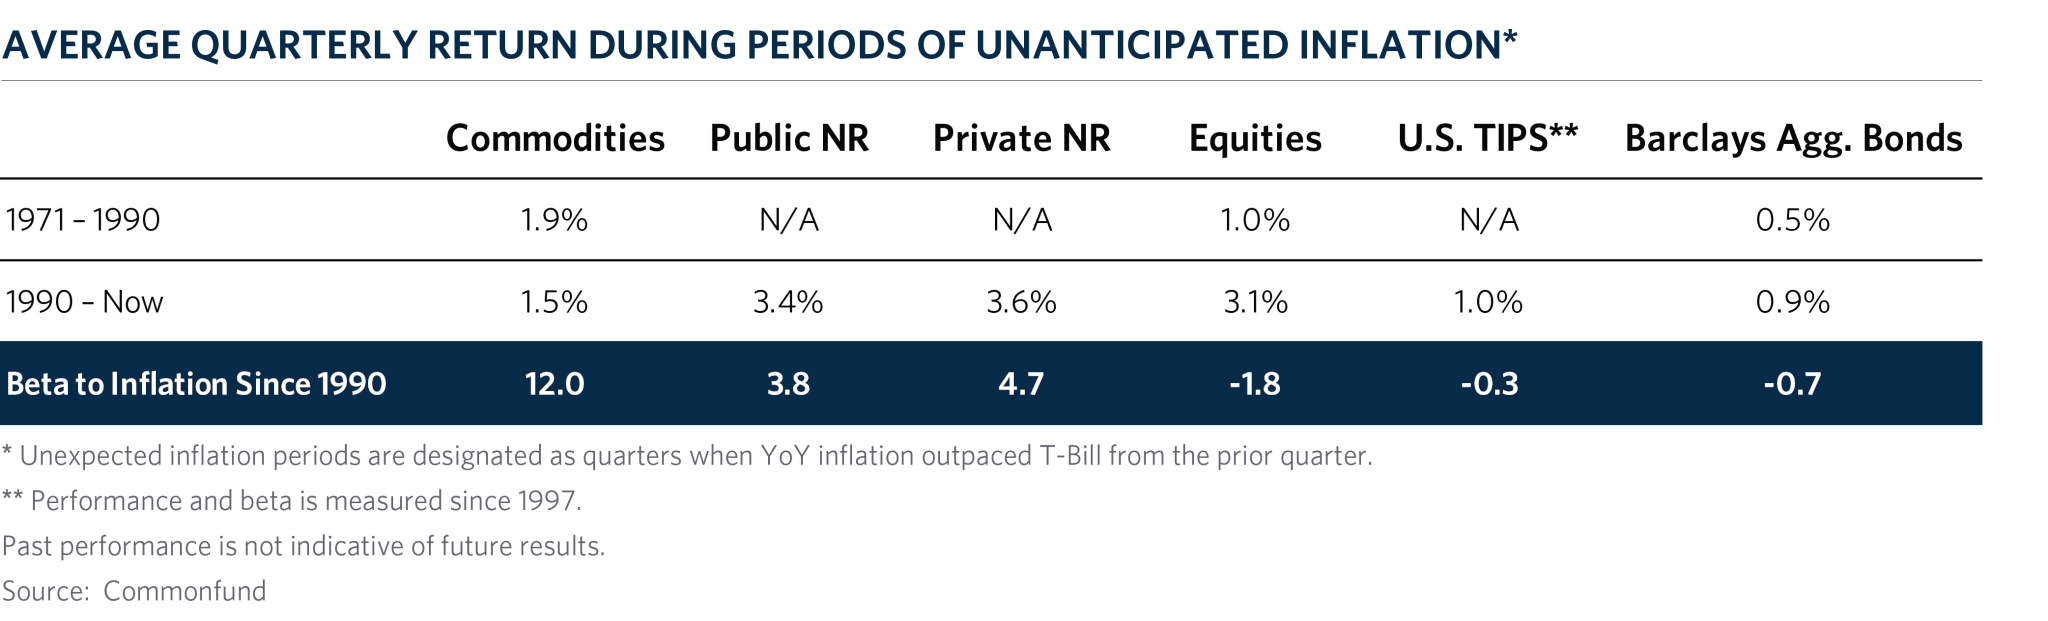 CH8_Avg_Qtr_Rtn_During_Unanticipated_Inflation